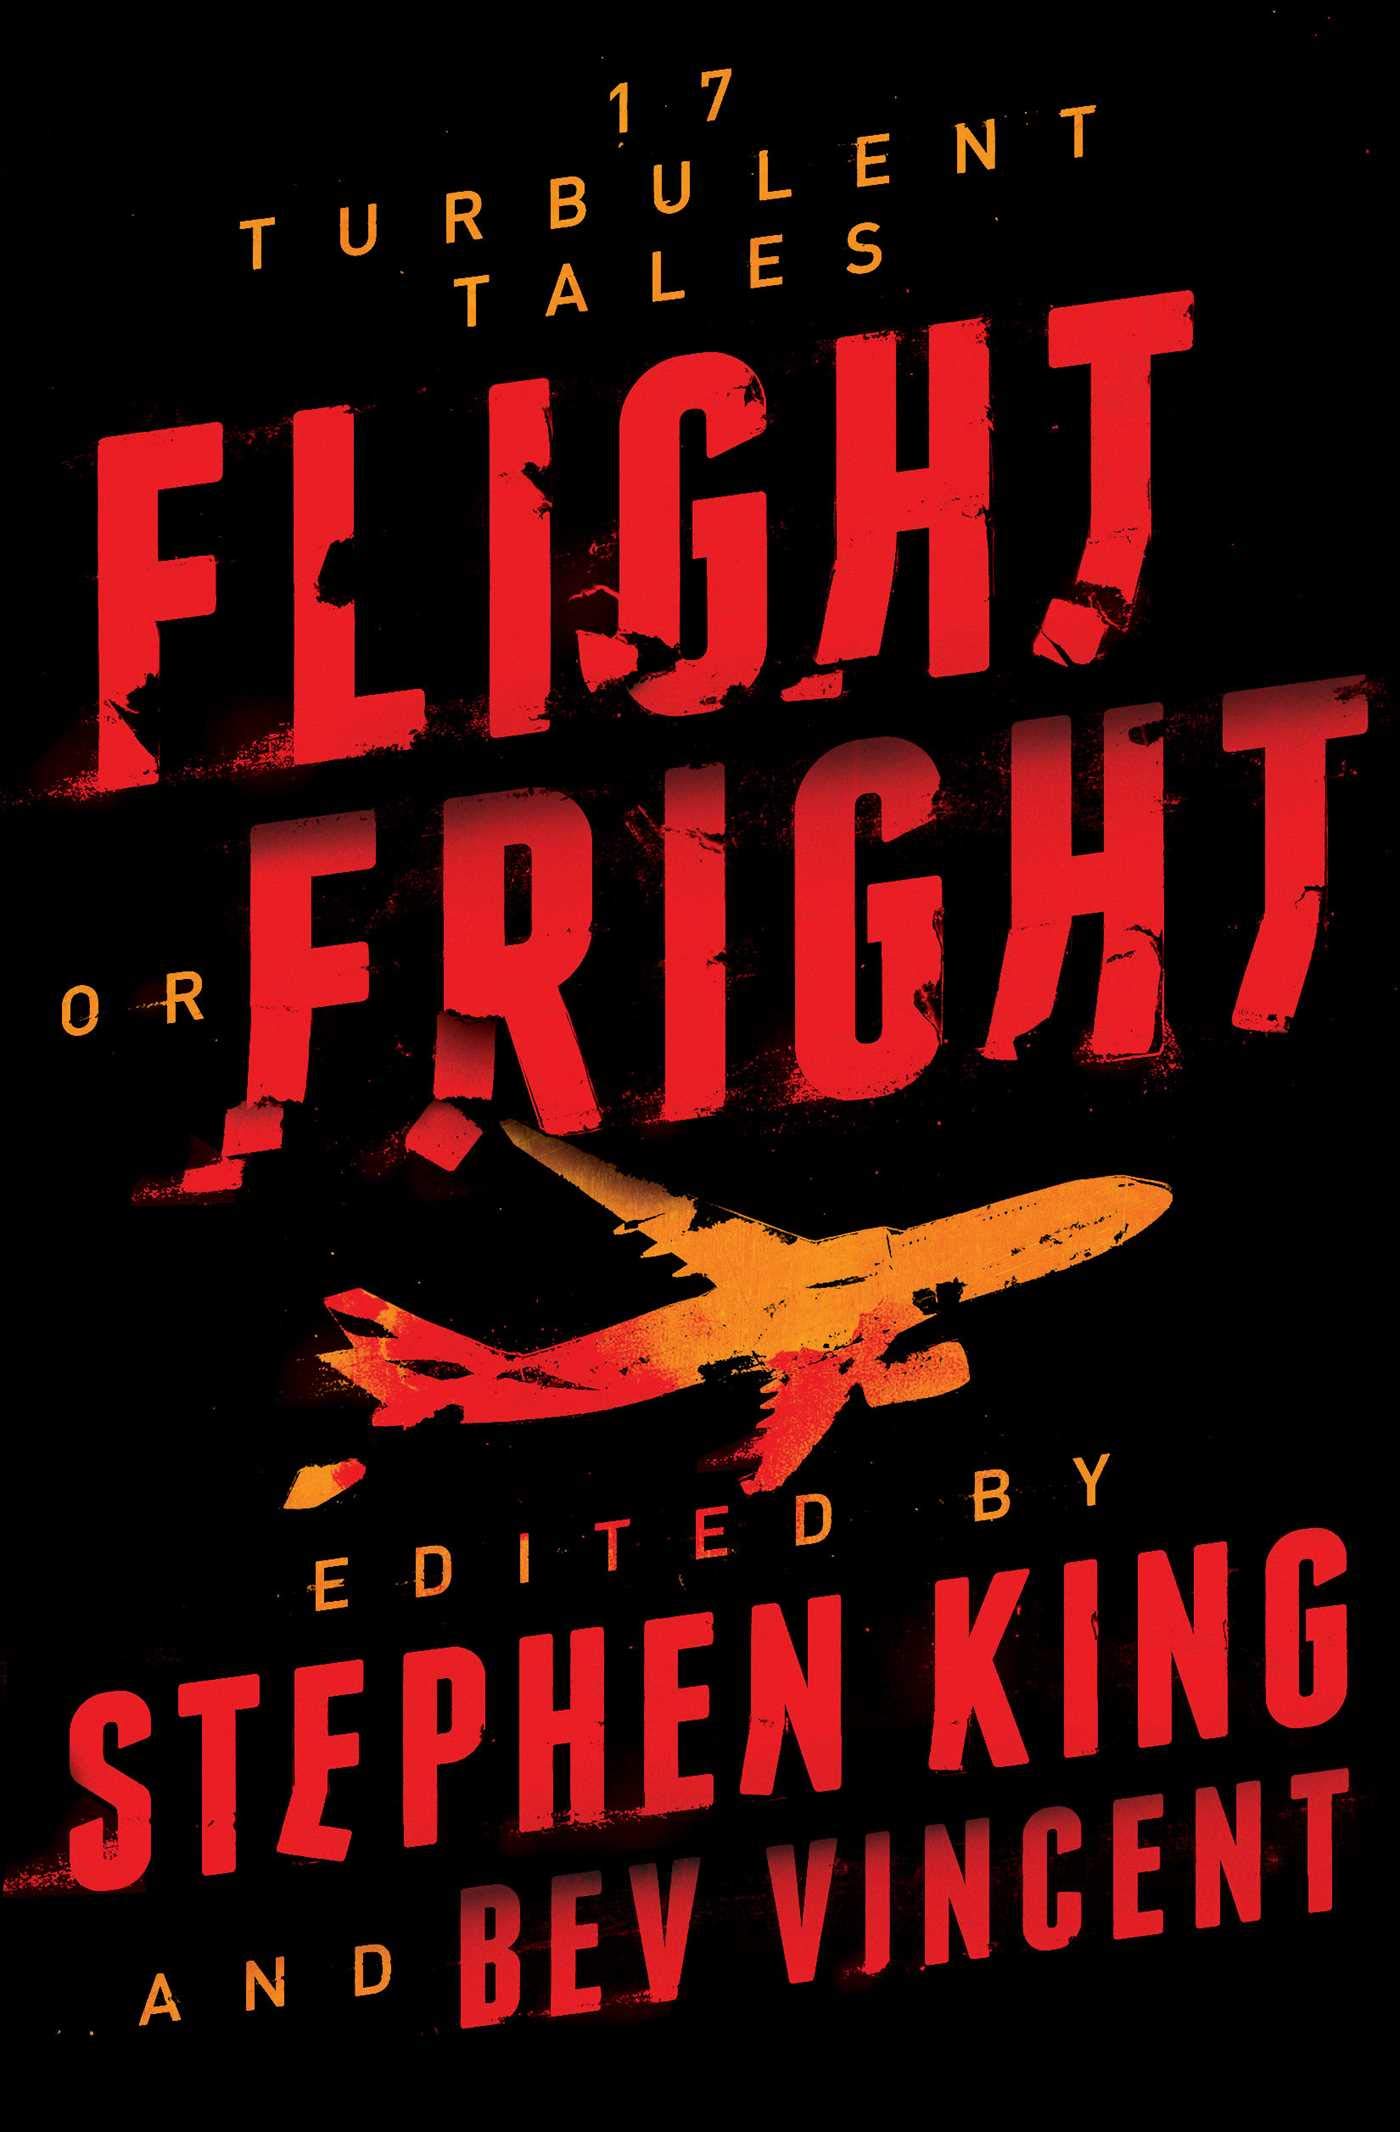 A striking book cover for "flight or fright: 17 turbulent tales," edited by stephen king and bev vincent, featuring bold red and yellow text on a black background, teasing the thrilling and eerie stories within.